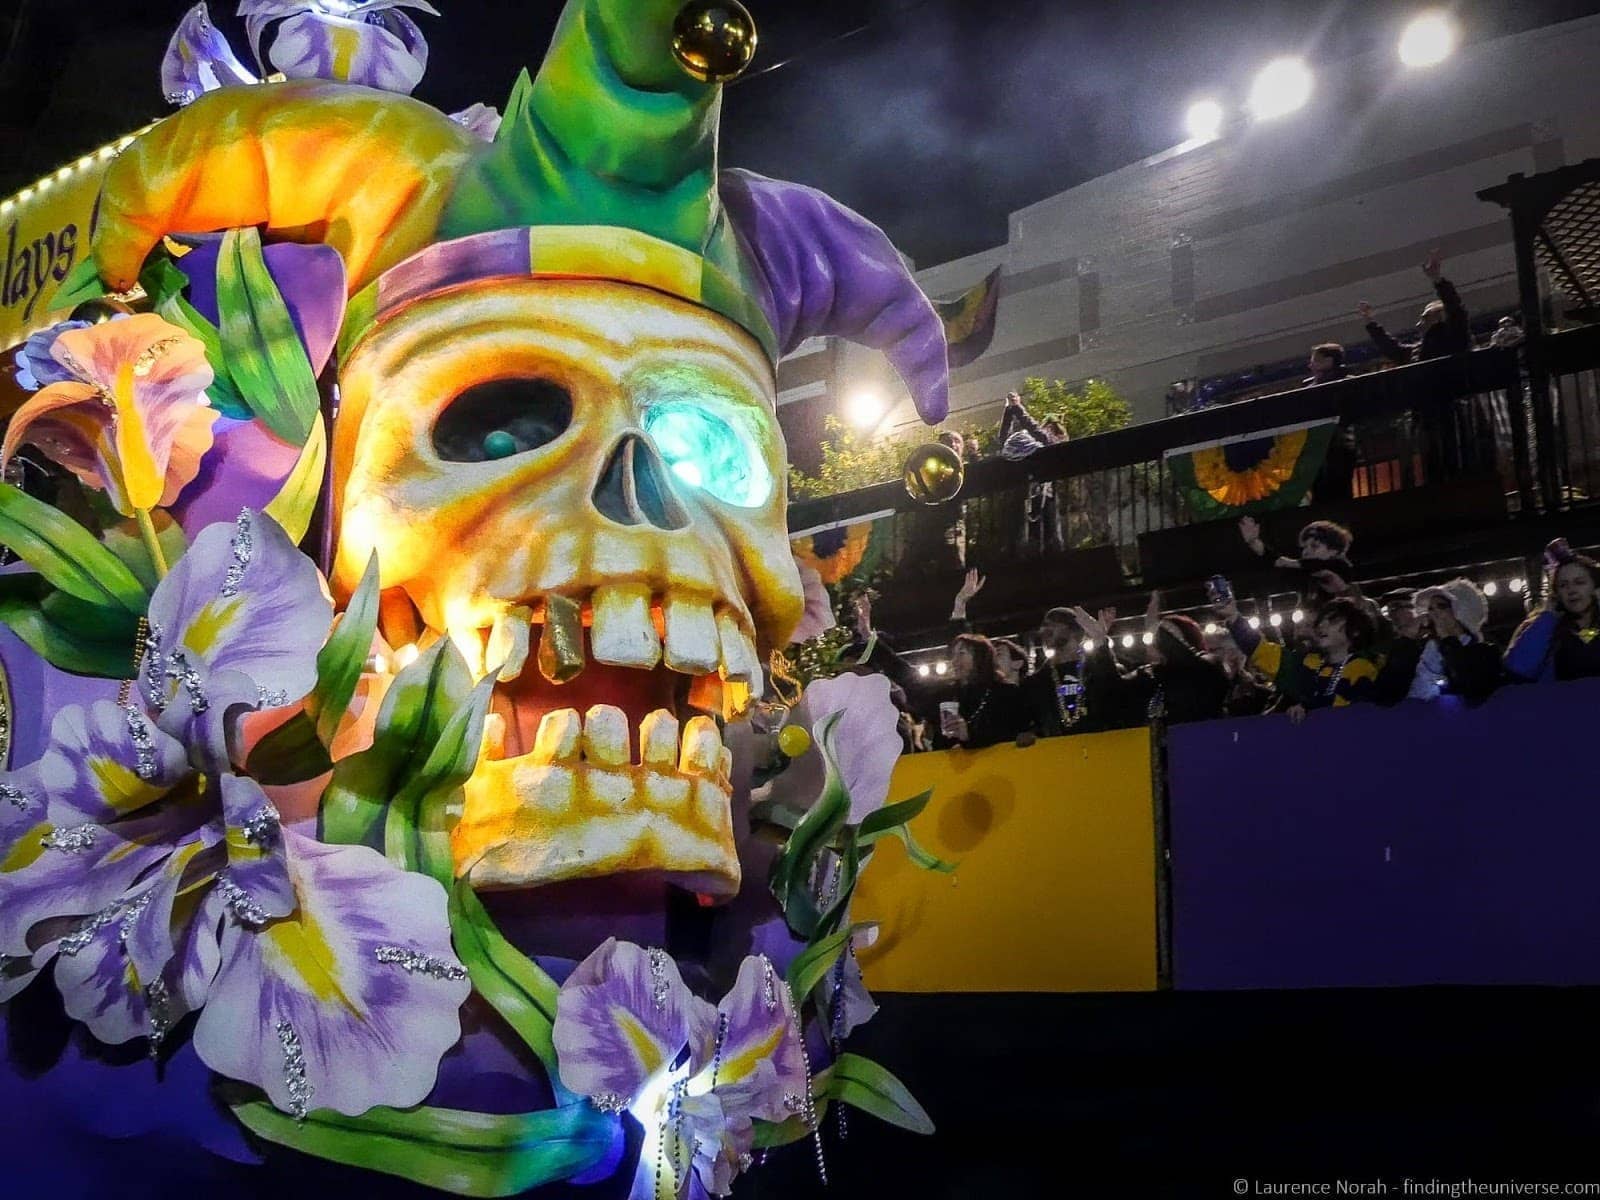 New Orleans Calendar Of Events 2022 Mardi Gras 2022 In New Orleans - A Full Guide - Finding The Universe